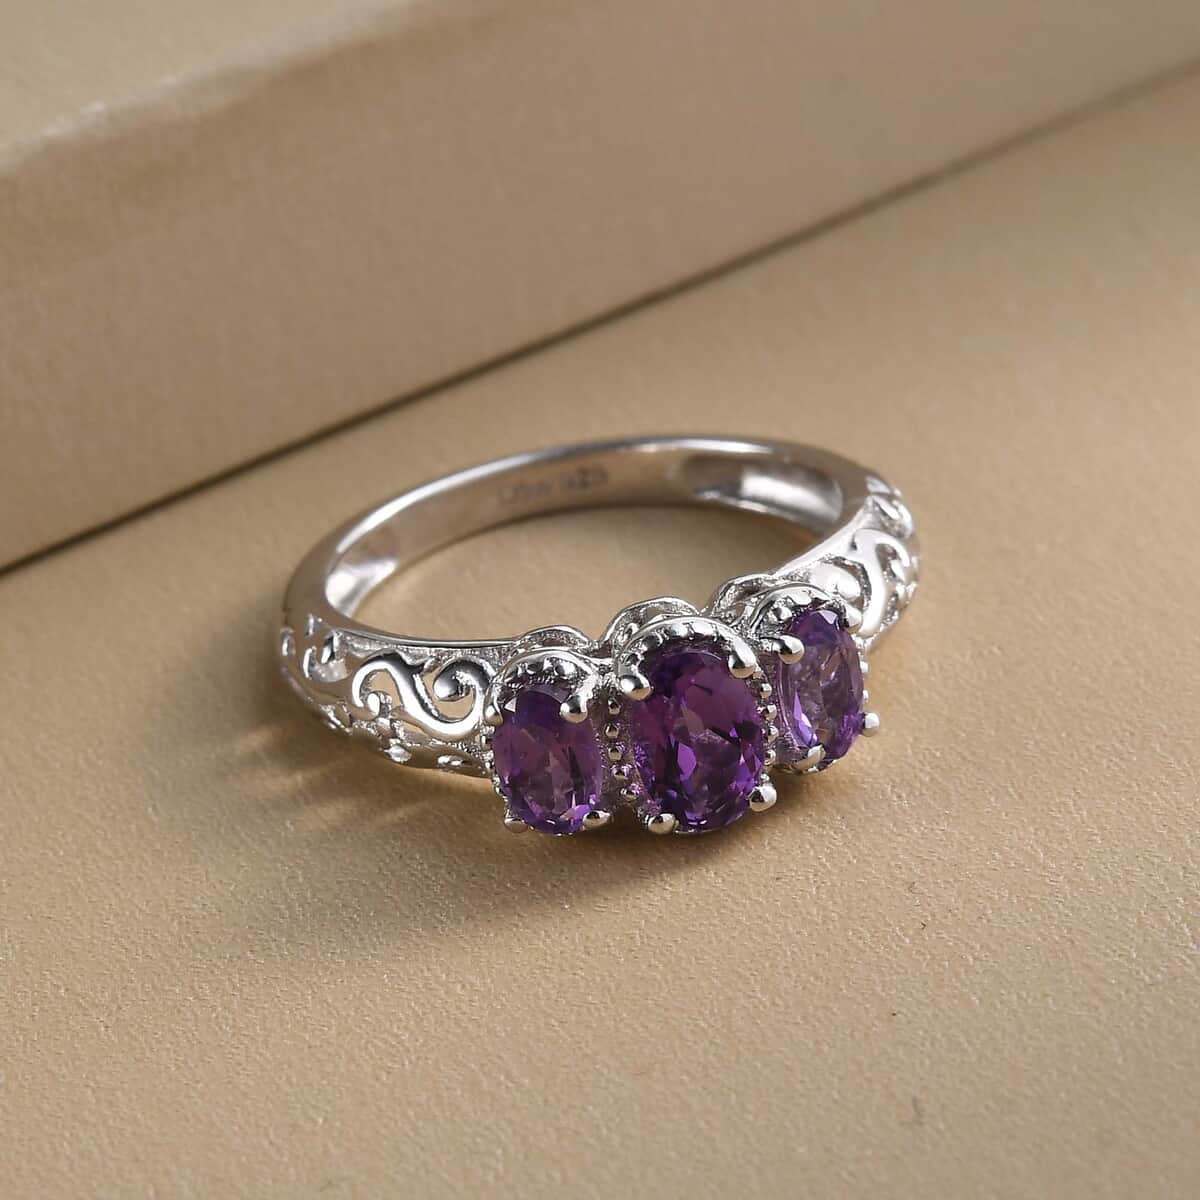 Amethyst Ring, 3 Stone Amethyst Ring, Trilogy Ring, Sterling Silver Ring, Birthstone Jewelry, Amethyst 3 Stone Ring 0.85 ctw (Size 10.0) image number 5